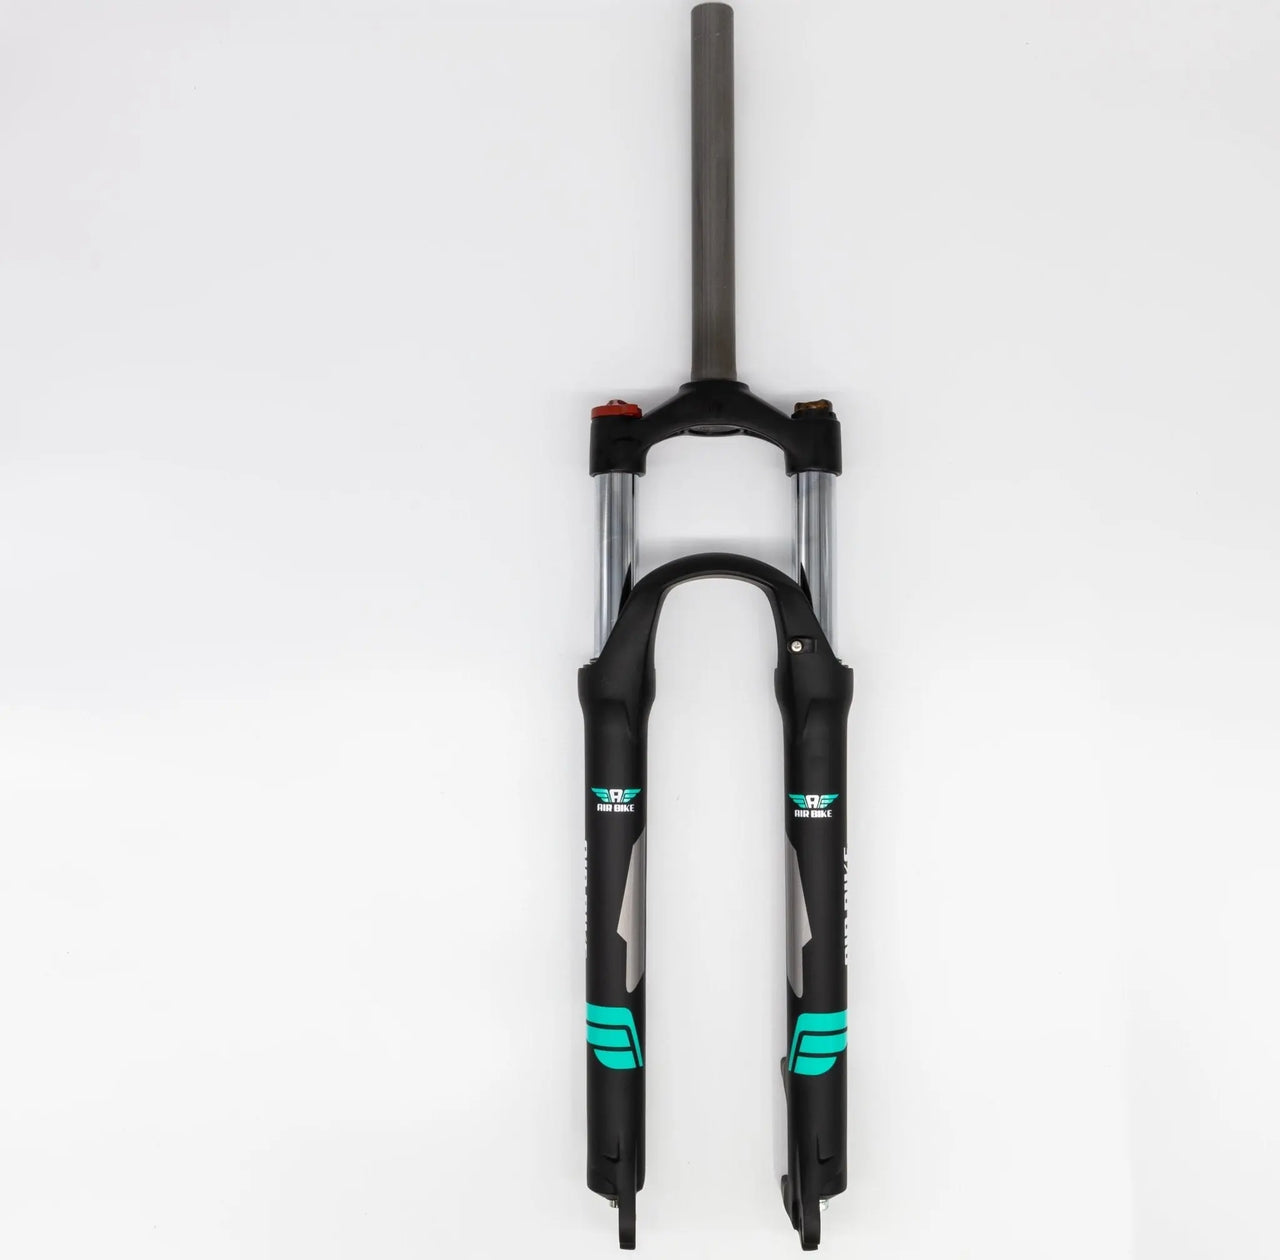 26 Inch Tapered Suspension Fork Black Air Bike XC28 120mm Travel & Lockout Mountain Bike Quick Release Fork - Air BikeSuspension Fork